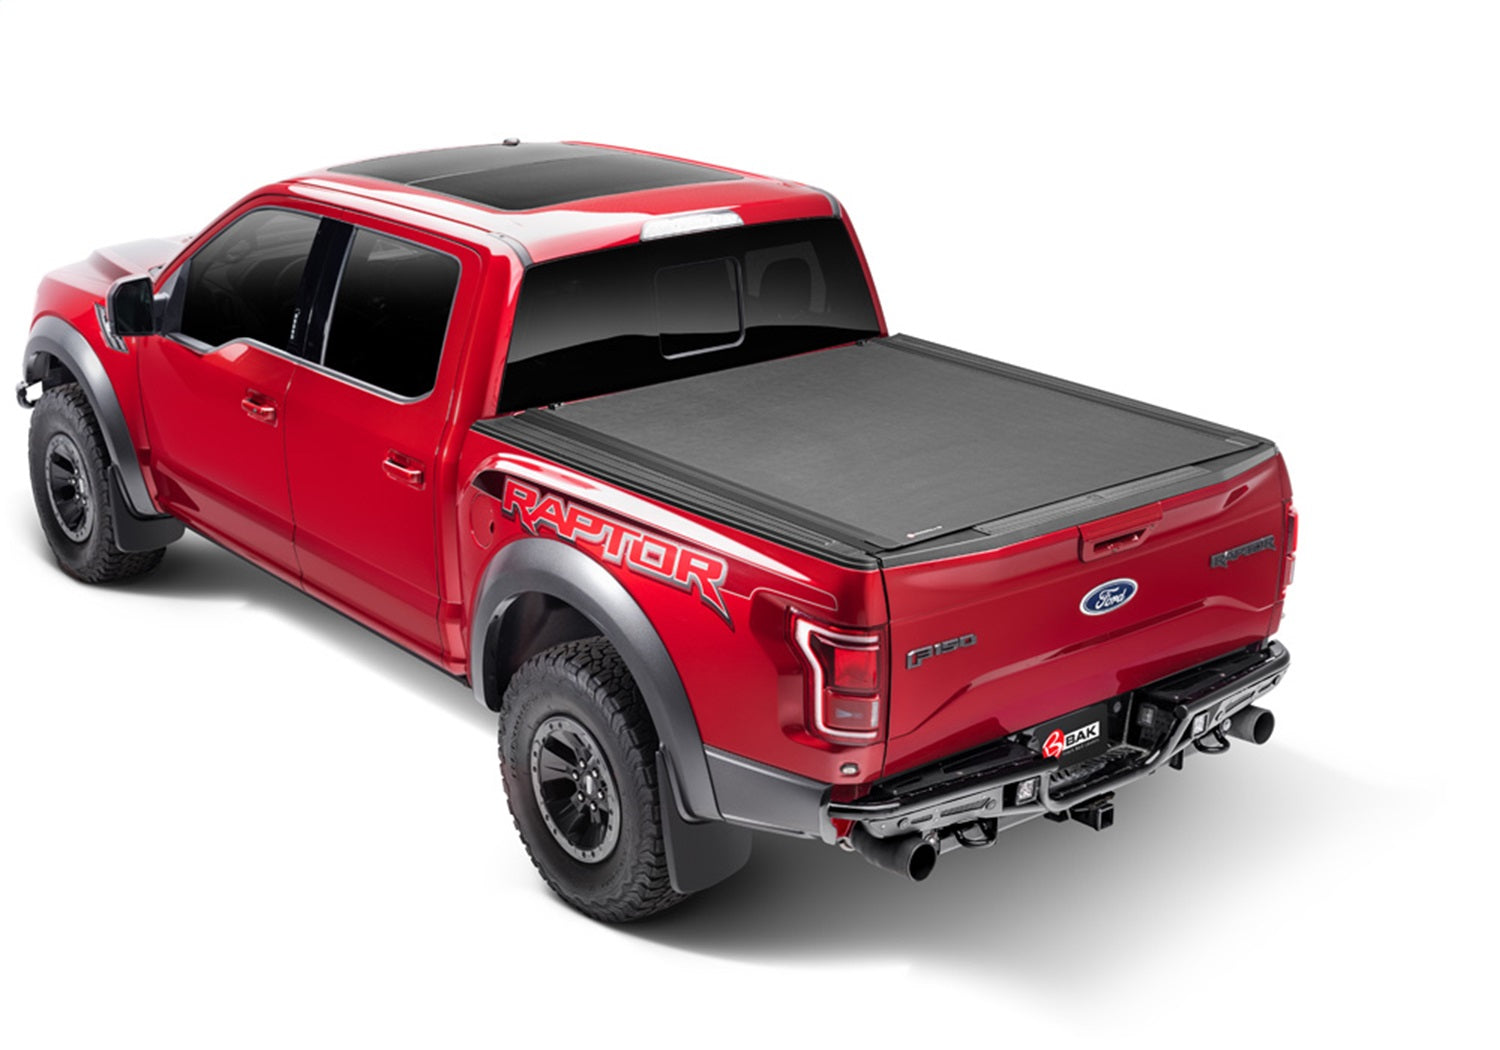 BAK Industries 80407 Revolver X4s Hard Rolling Truck Bed Cover Fits 05-15 Tacoma